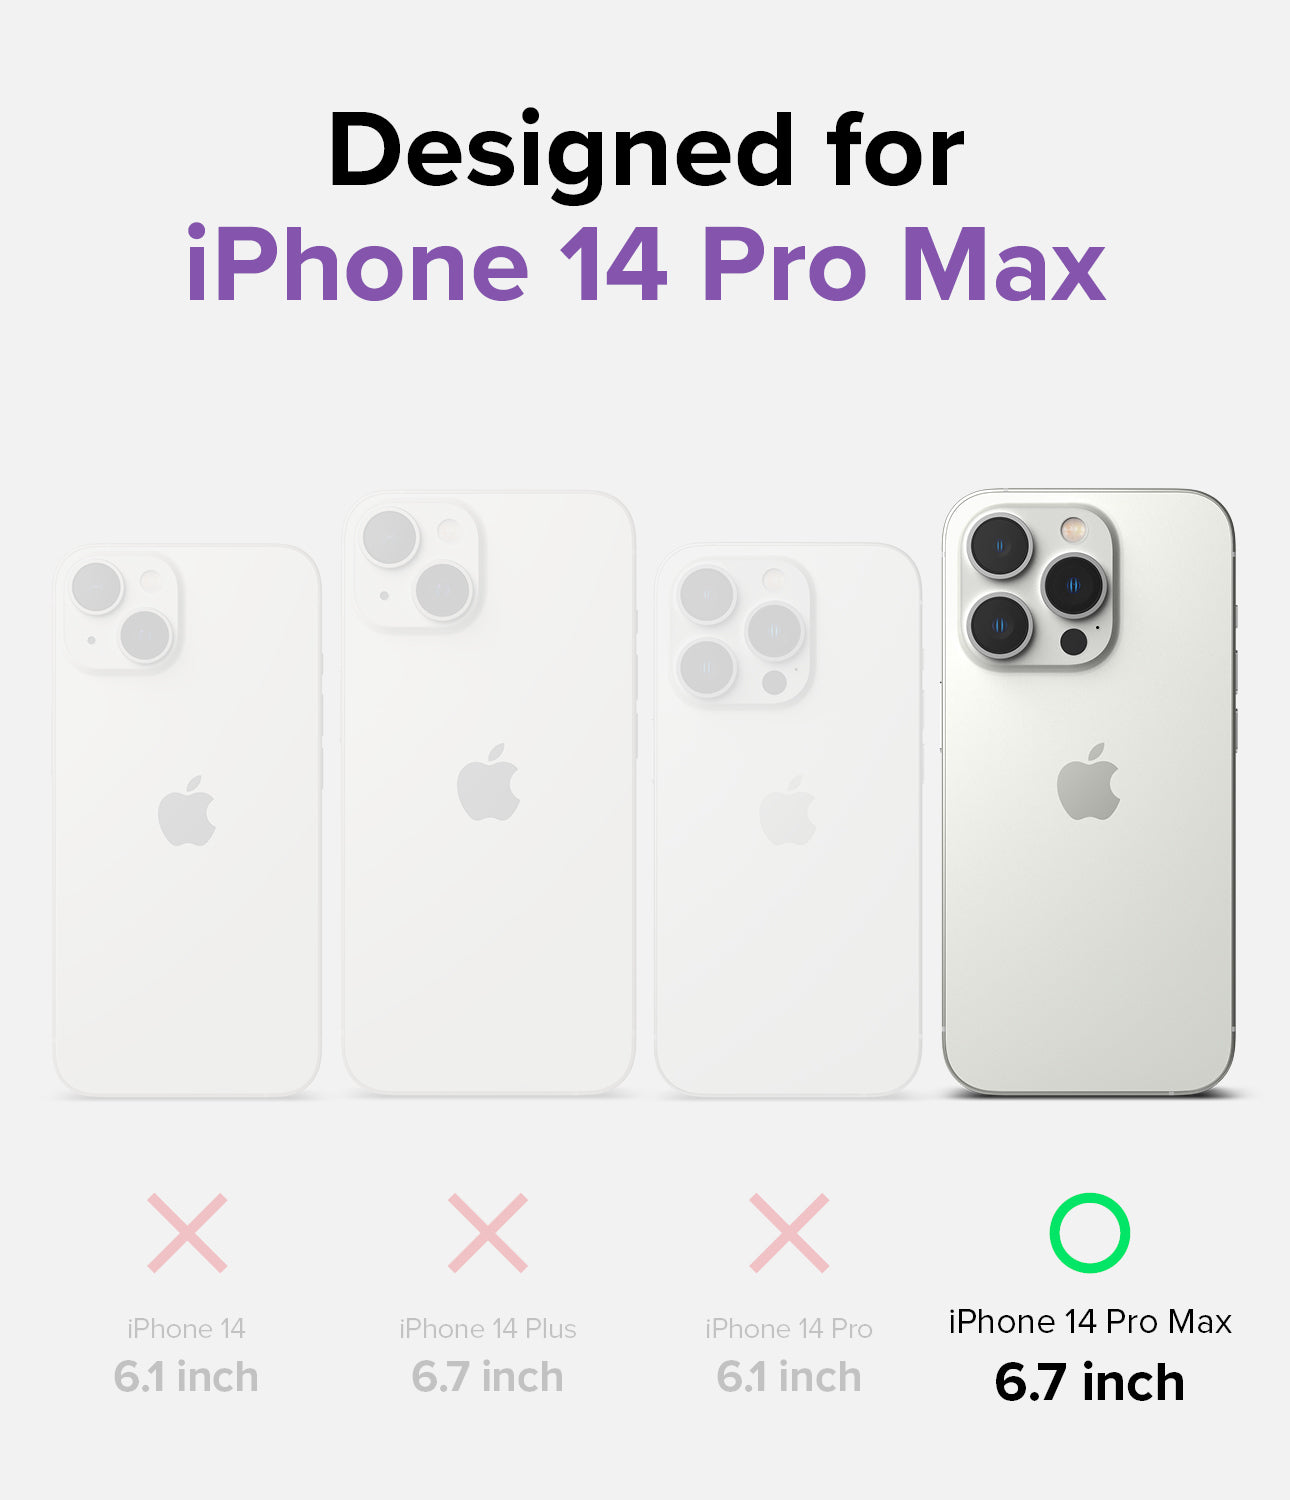 GIFT SET | iPhone 14 Pro Max - Designed for 6.7 inch iPhone 14 Pro Max.